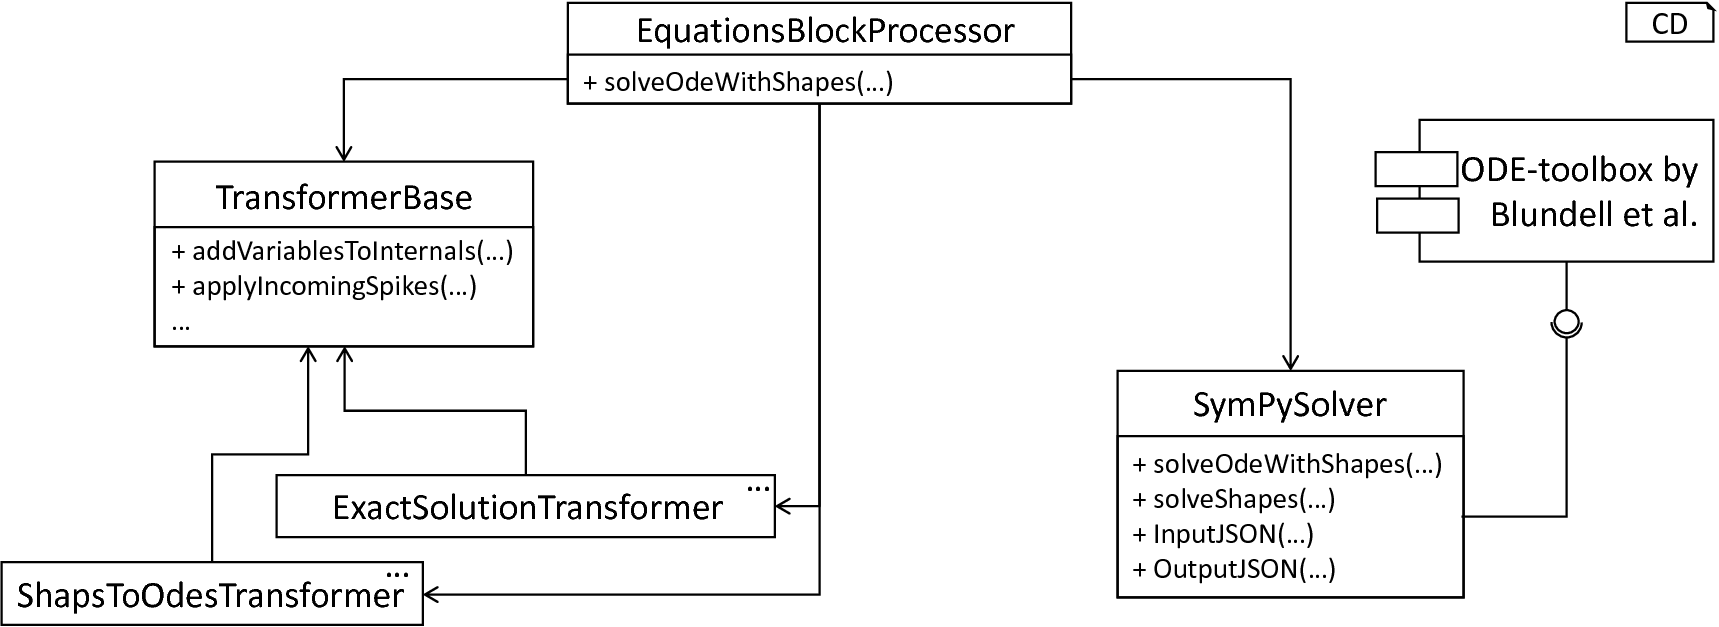 The model transformation subsystem